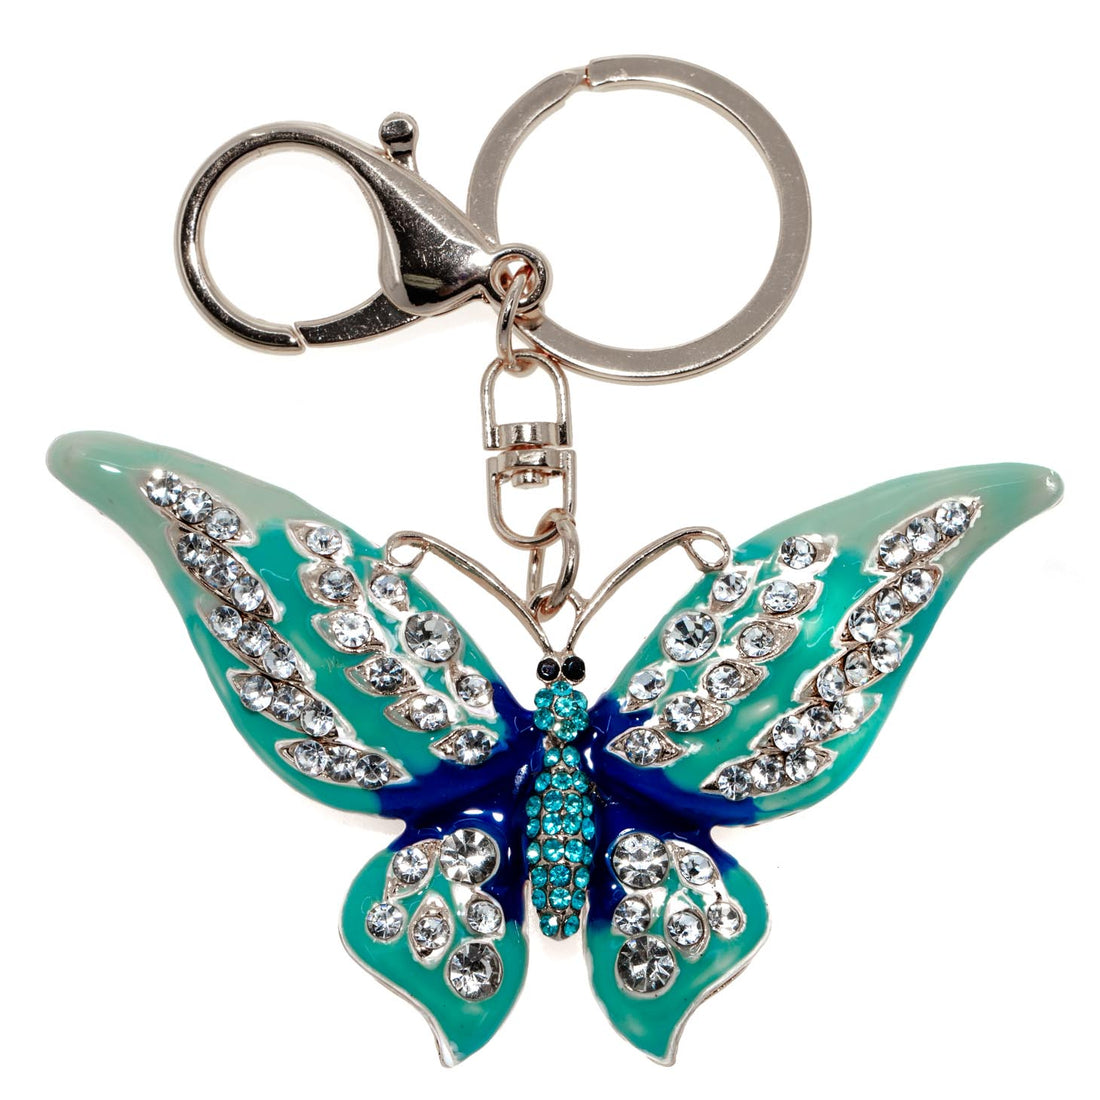 Keychain - Rhinestone Large Teal Butterfly